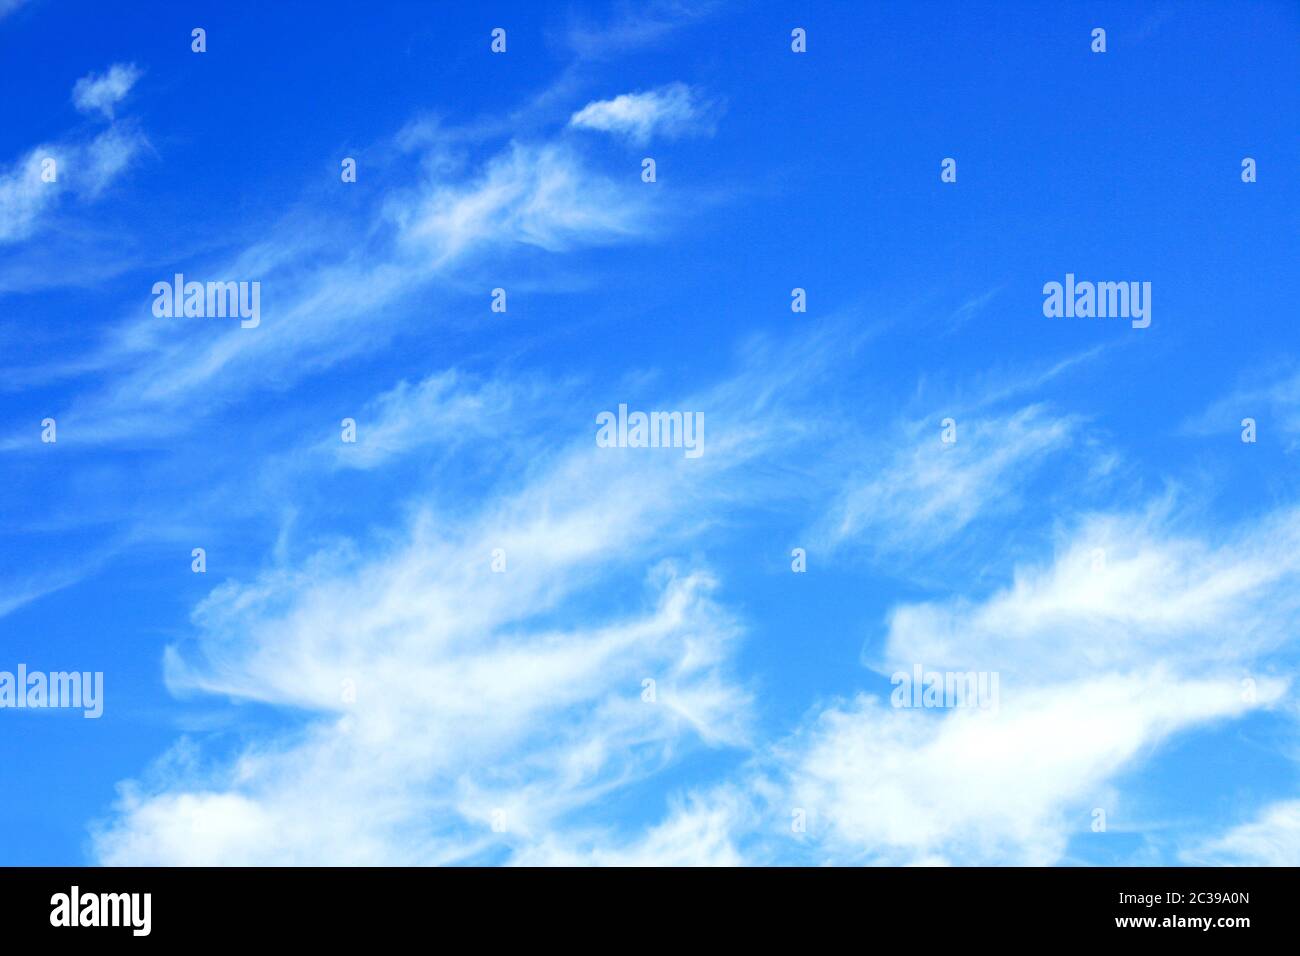 Big fluffy clouds (Altocumulus) with beautiful blue skies Stock Photo